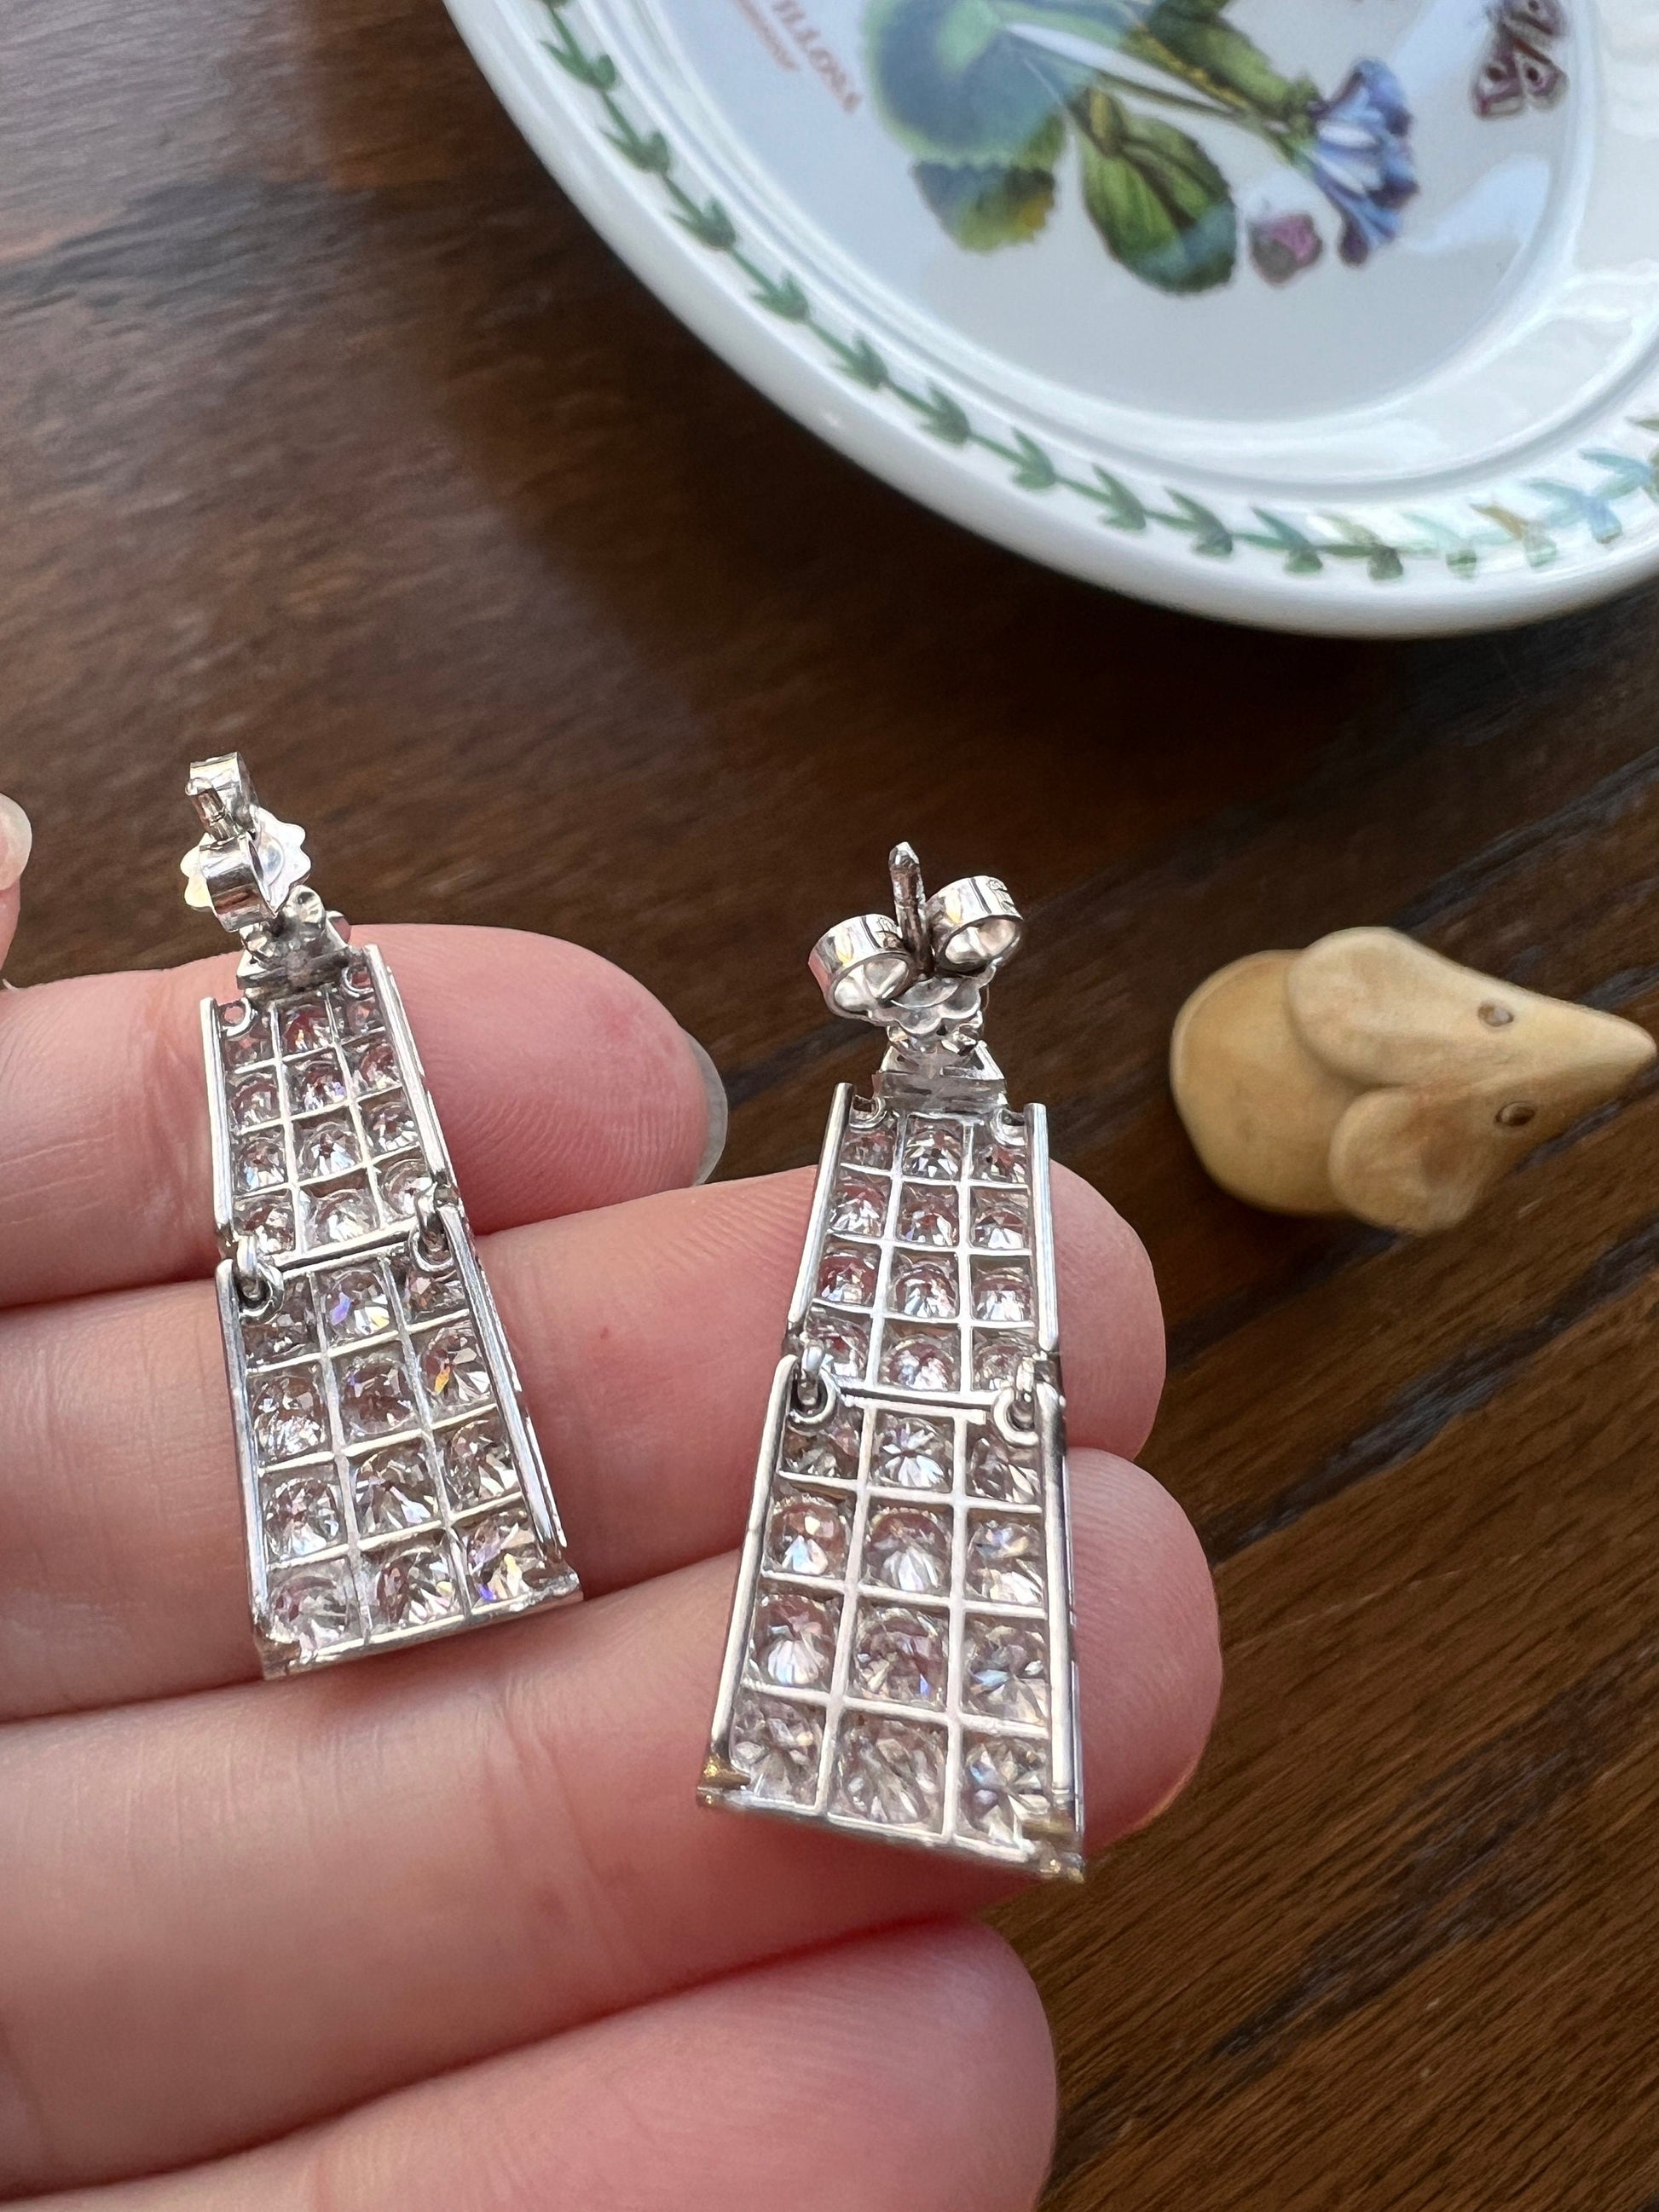 French Antique 3.4 Carats TRIANGLE Old Cut DIAMOND & Round Grid Panel Dangle Earrings PLATINUM 18k White Gold Edwardian Bridal Something Old